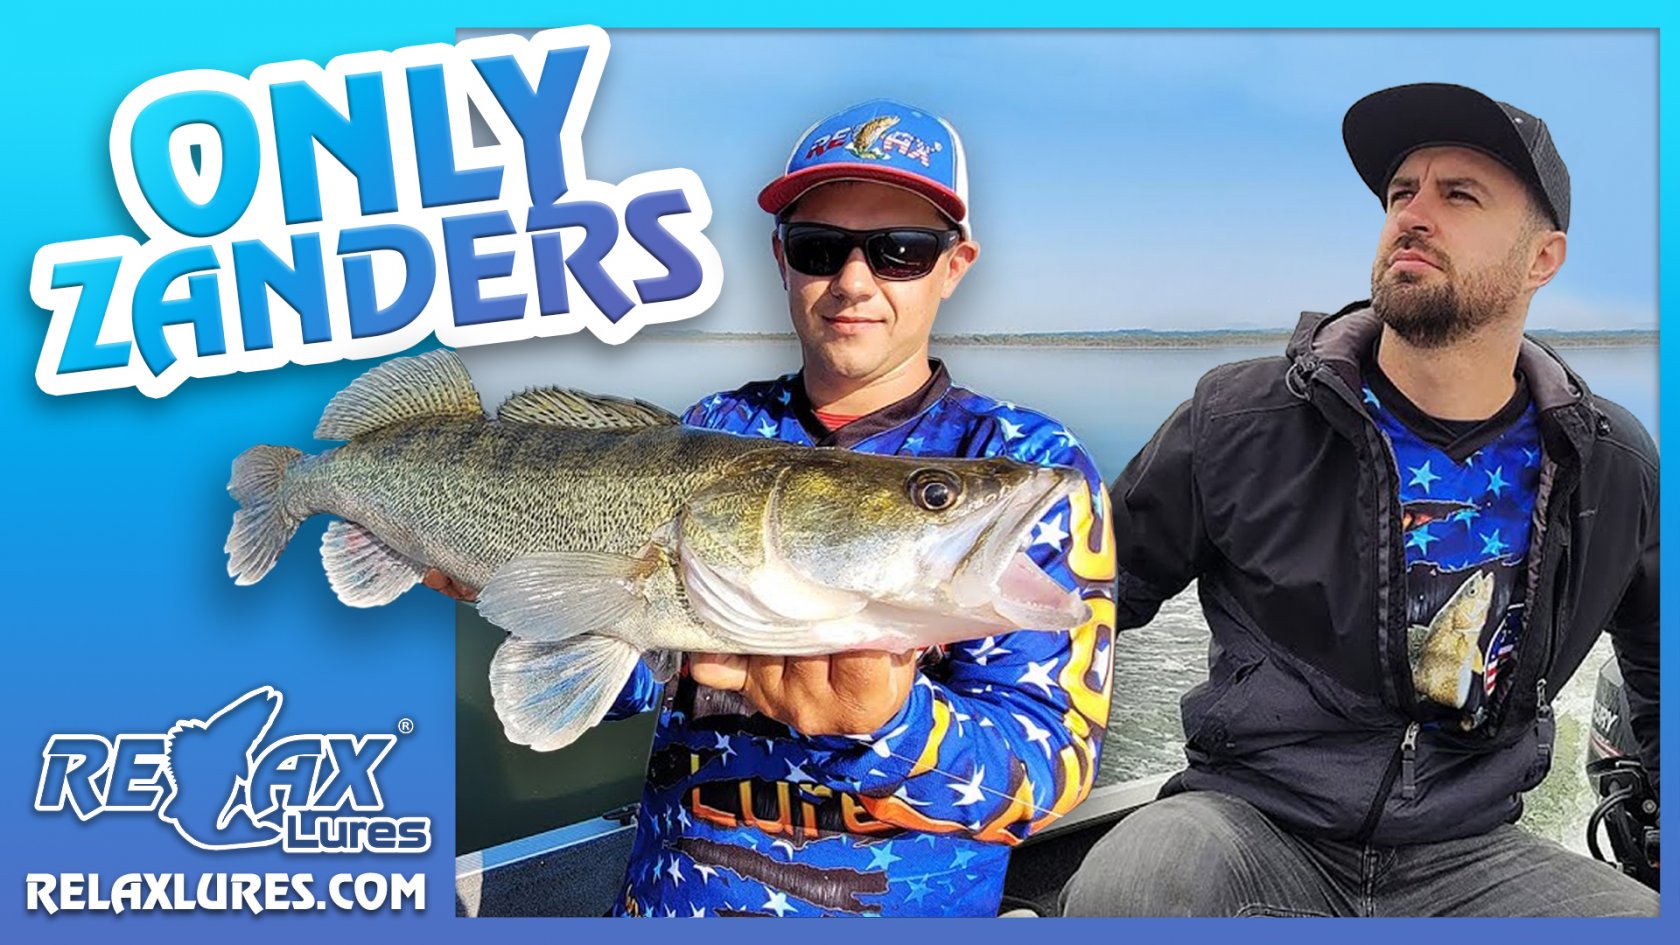 ONLY ZANDERS - RELAX LURES